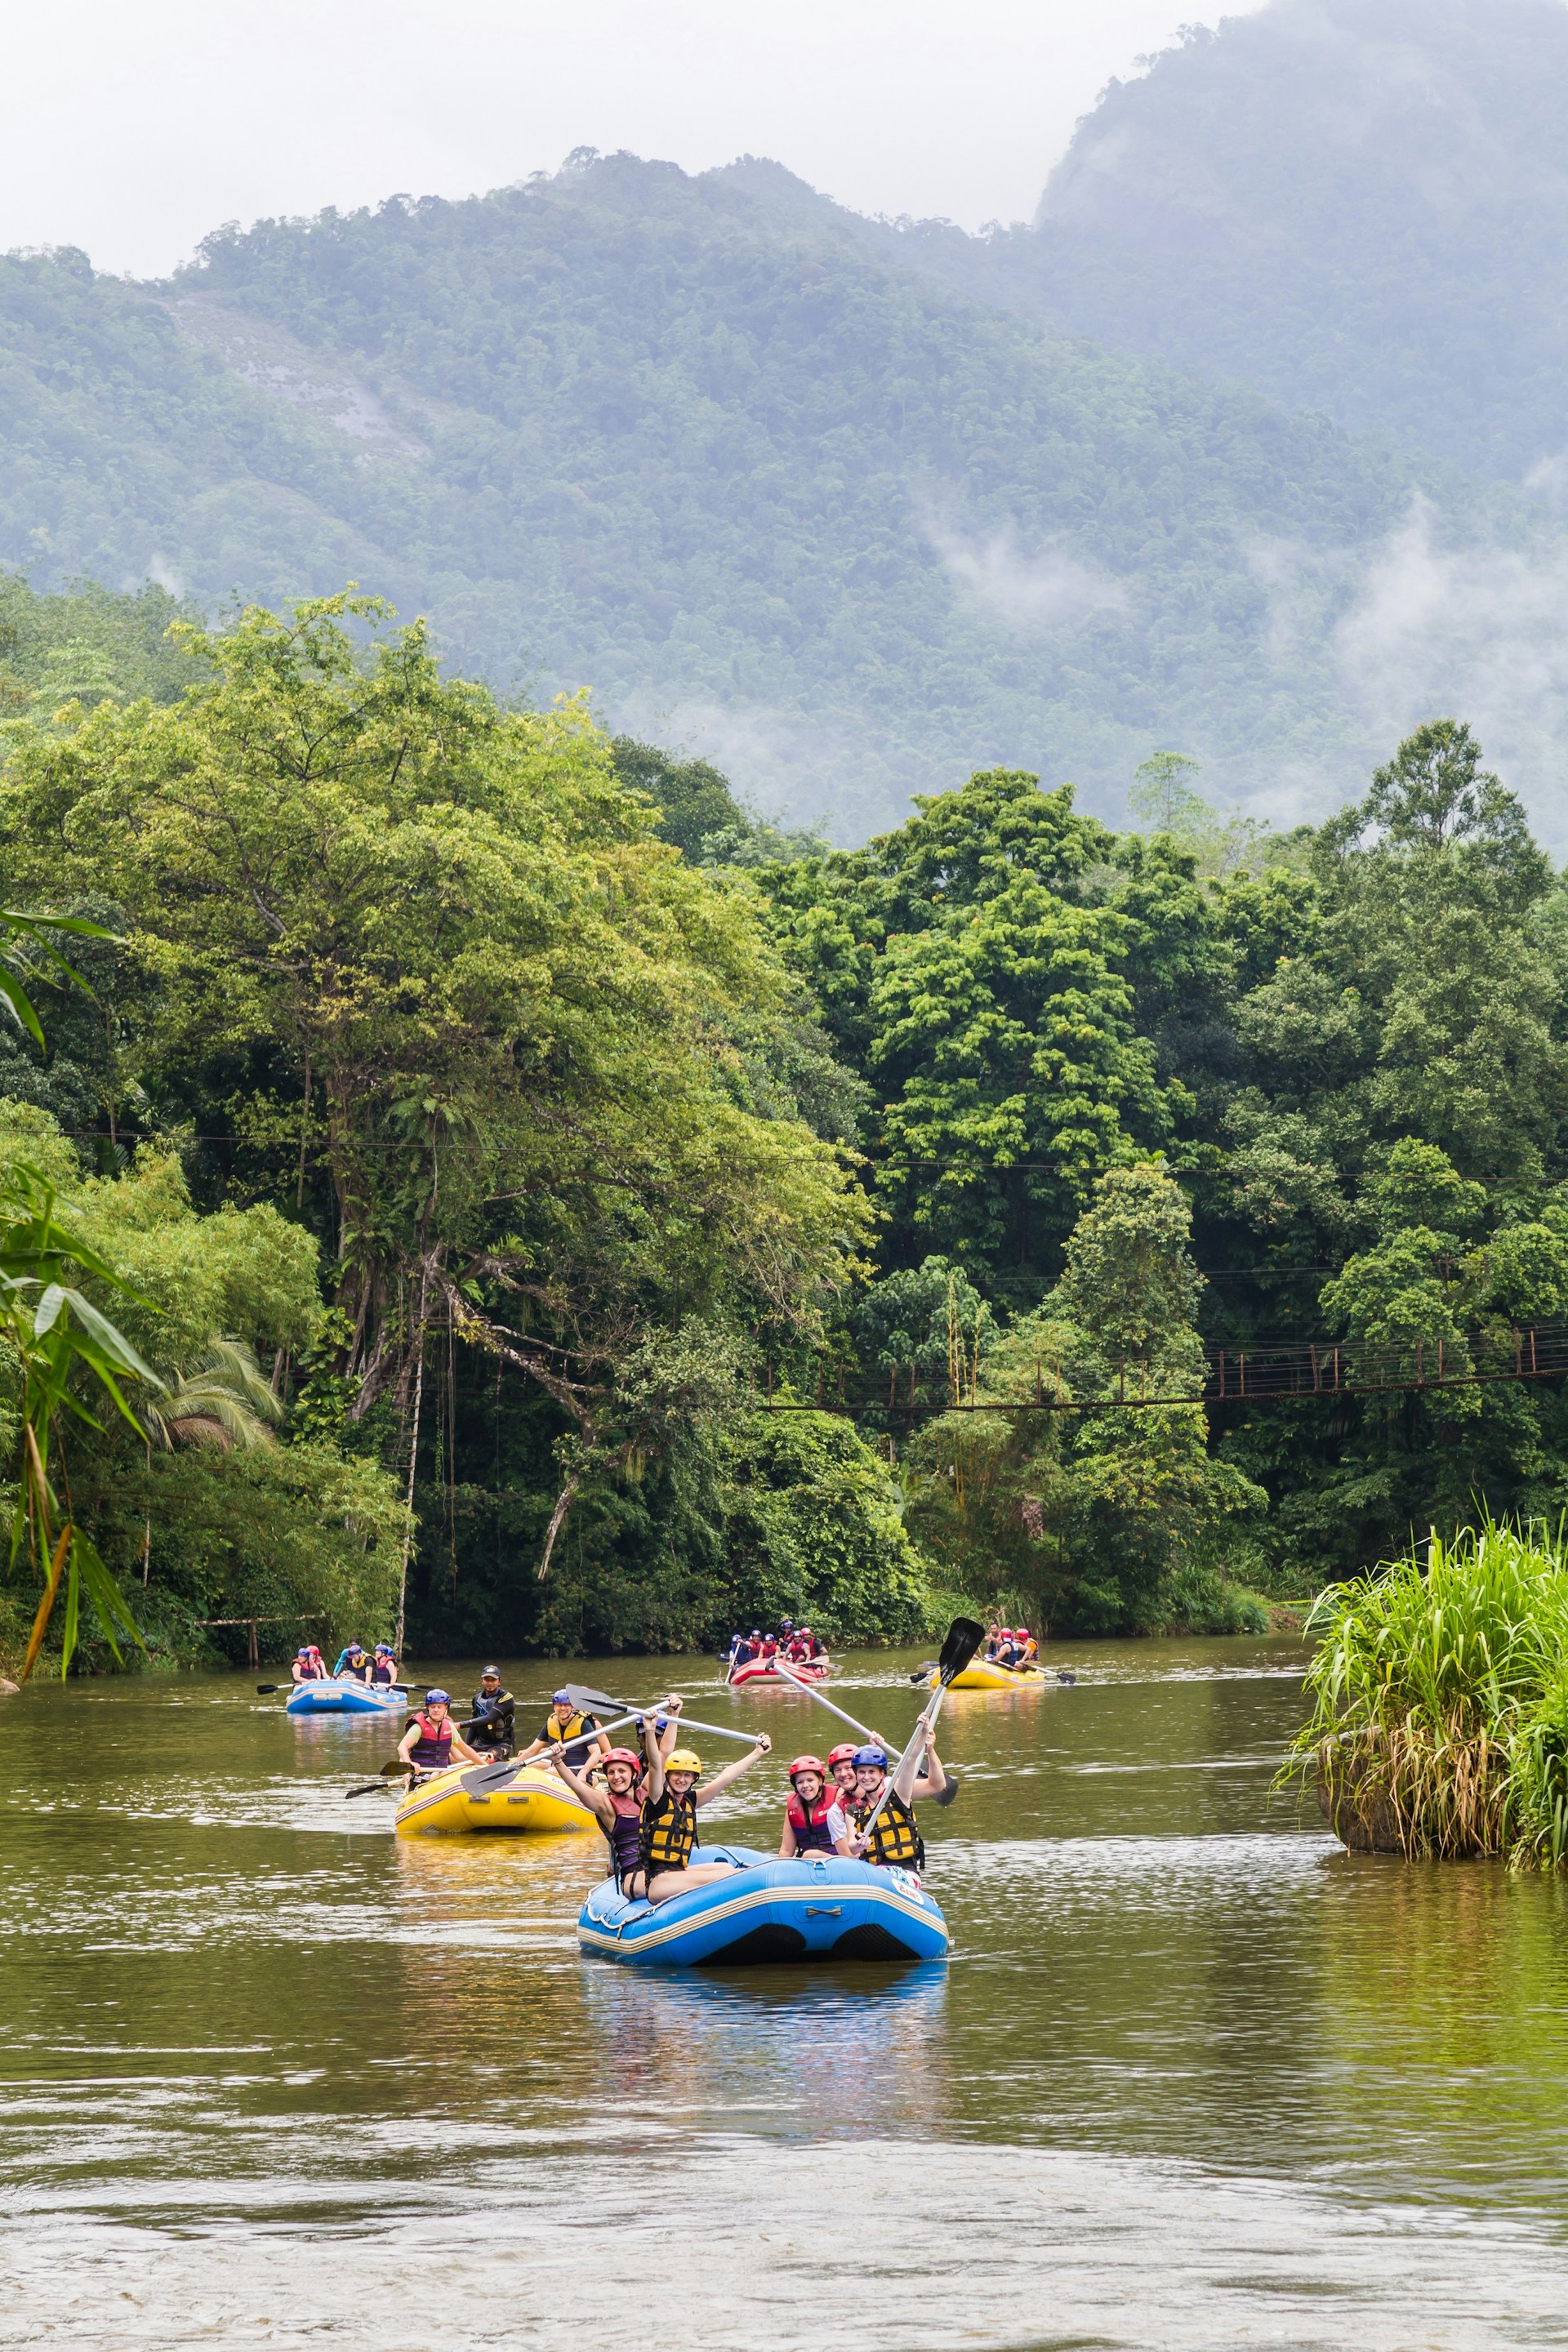 Several inflatable rafts, each holding six people, float along a serene section of river; the banks are lined with lush forest, as are the mountains in the background.